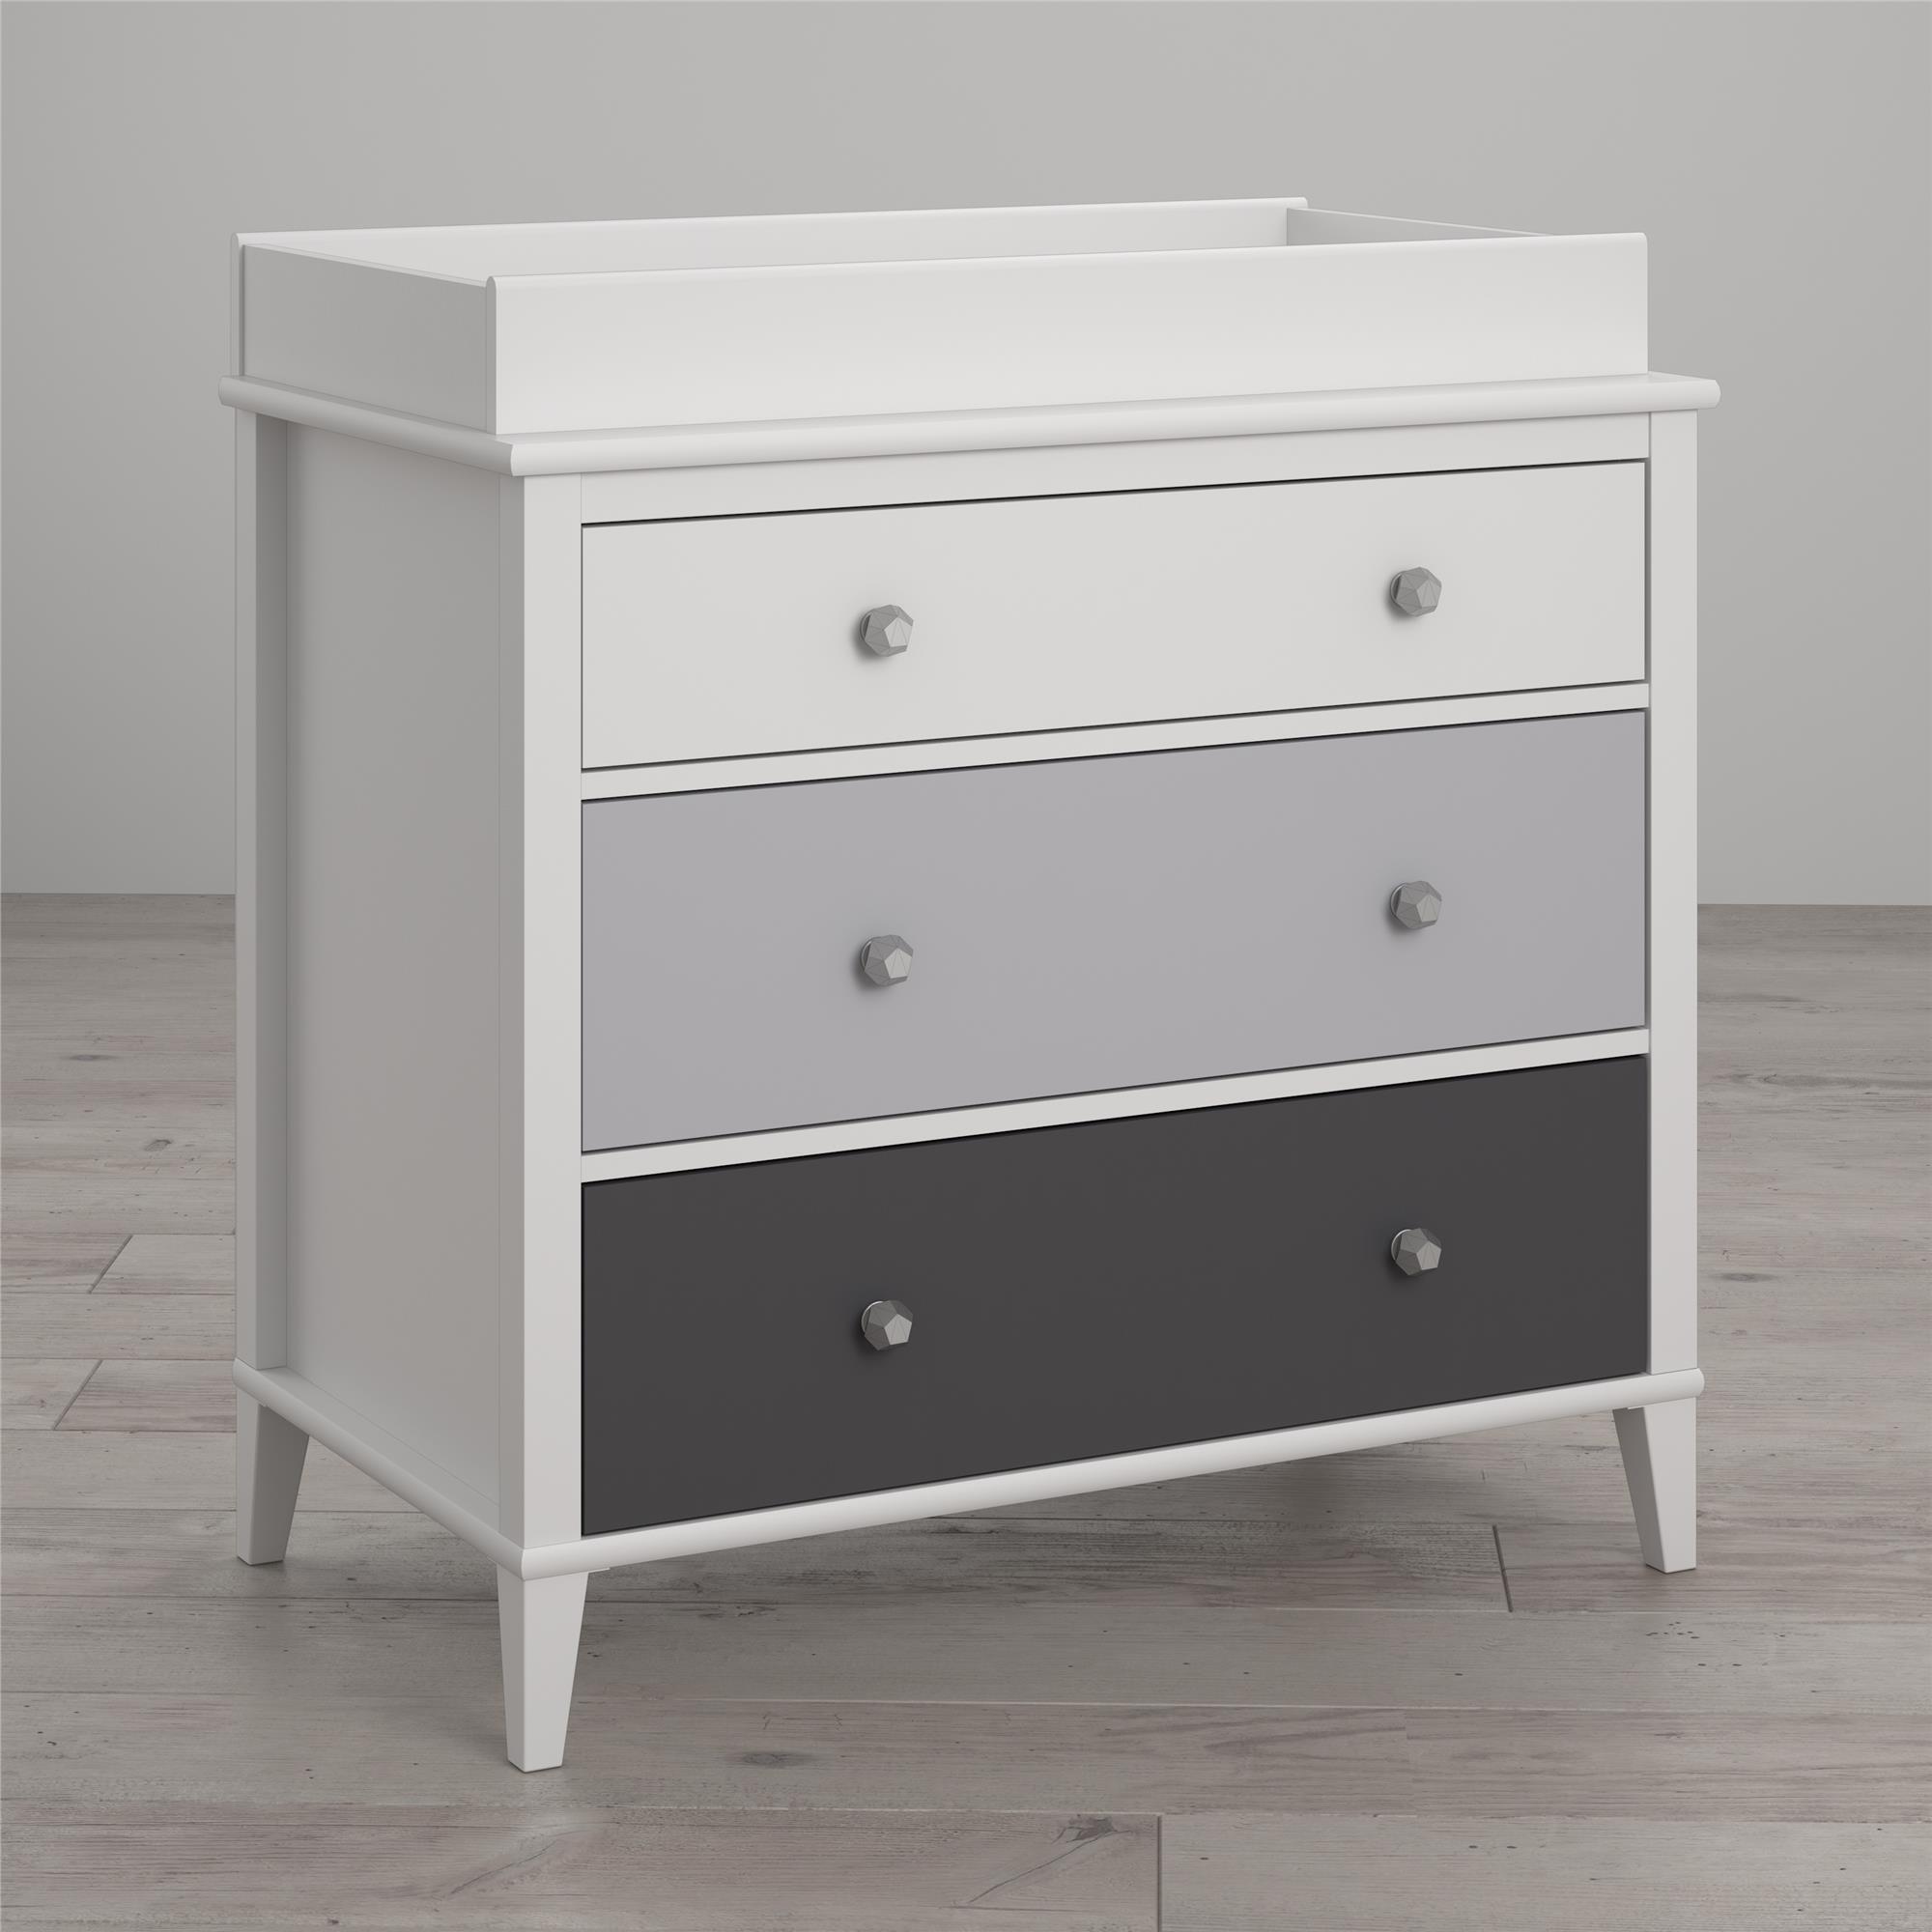 Changing Tables Online at Overstock 